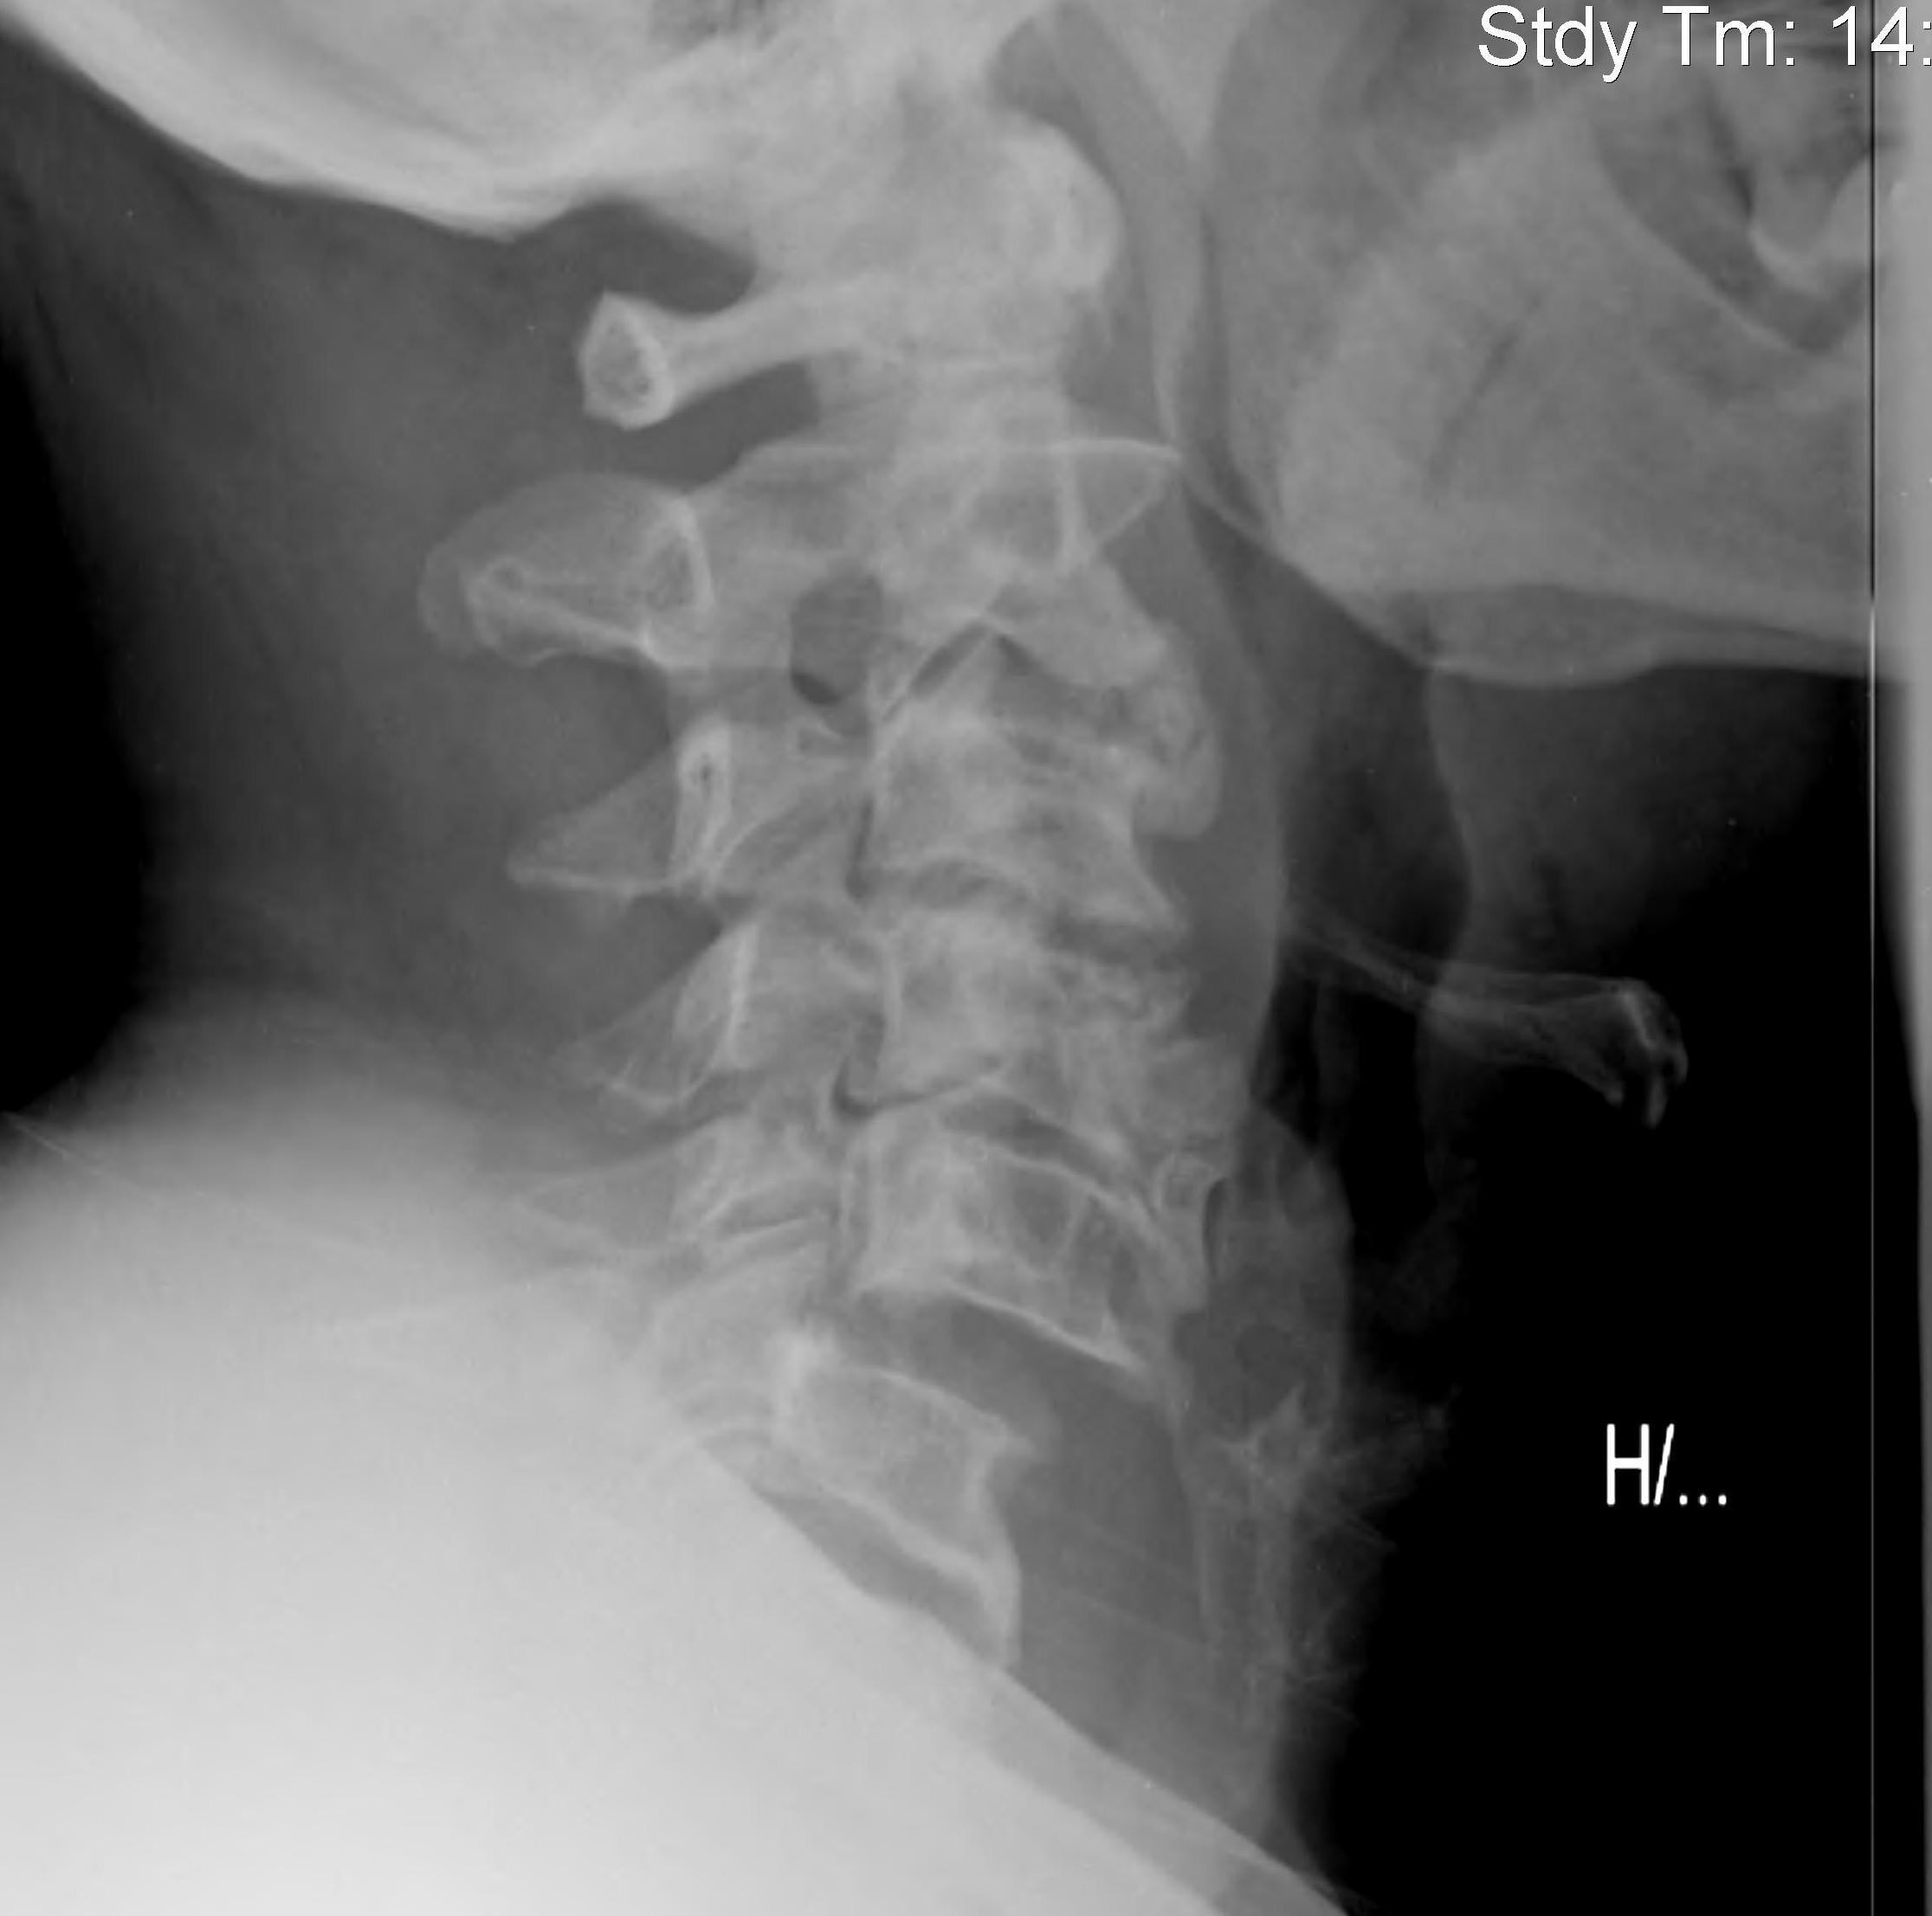 dislocated neck x ray